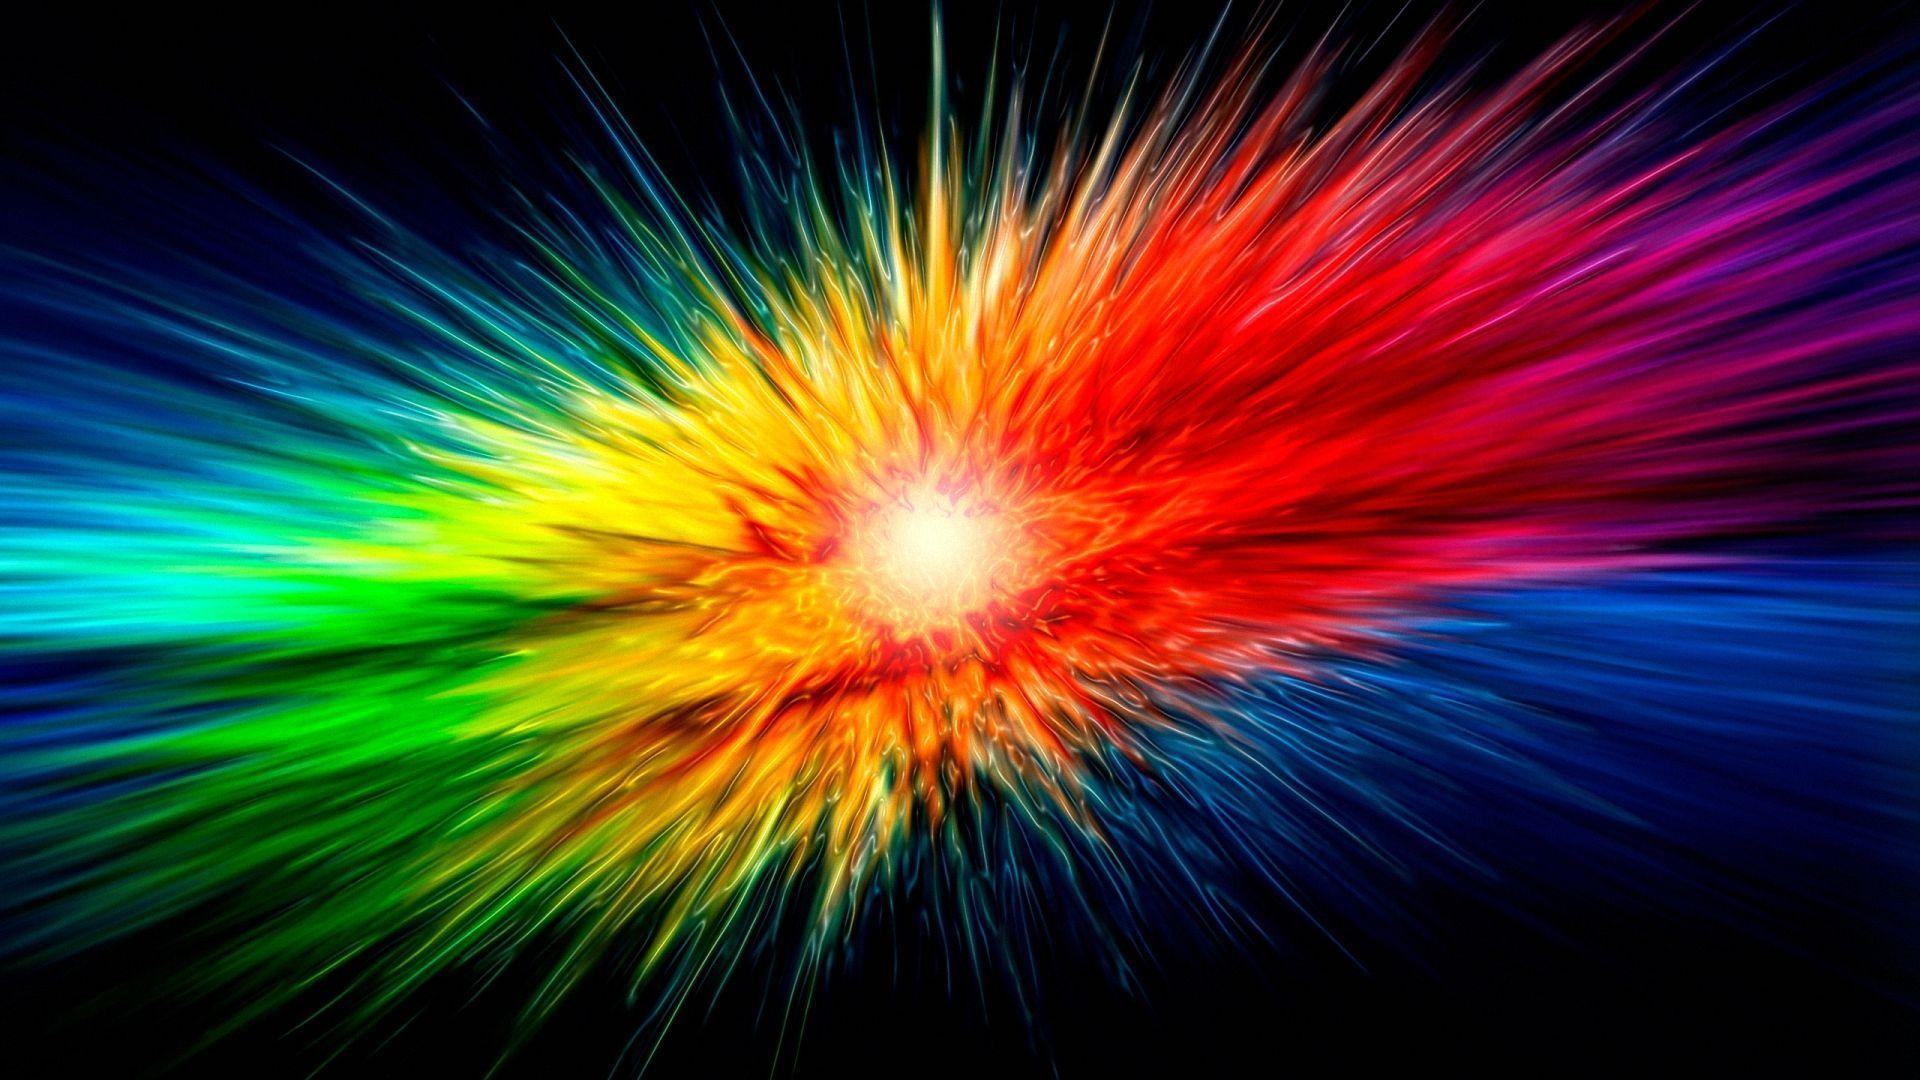 Abstract Colorful Explosion Liquid HD Wallpaper